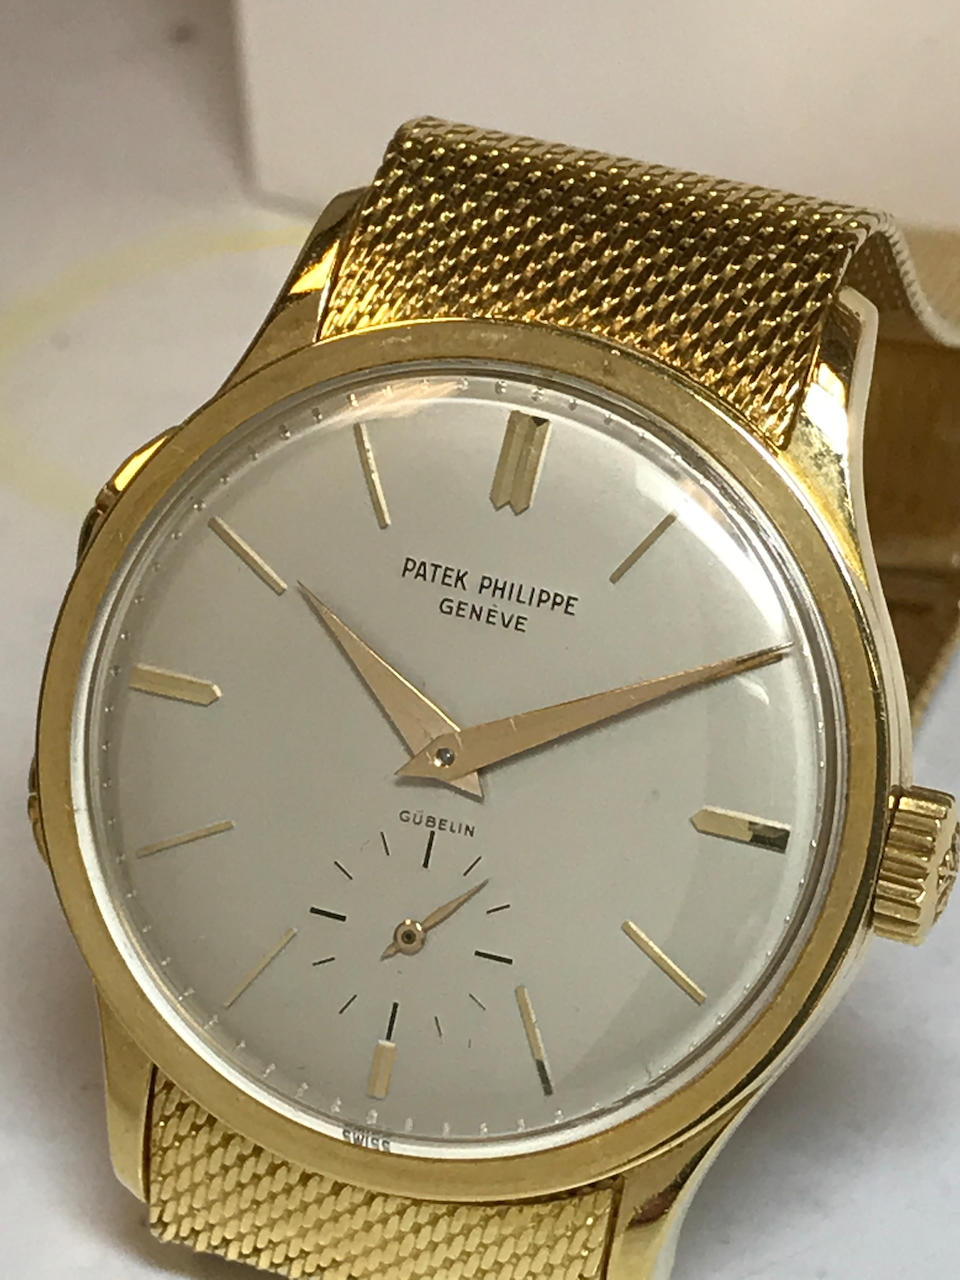 Patek Philippe. A fine and rare 18K gold dual time zone wristwatch with independently adjustable hour hand and an 18K gold braceletRetailed by G&#252;belin Ref: 2597, 1961